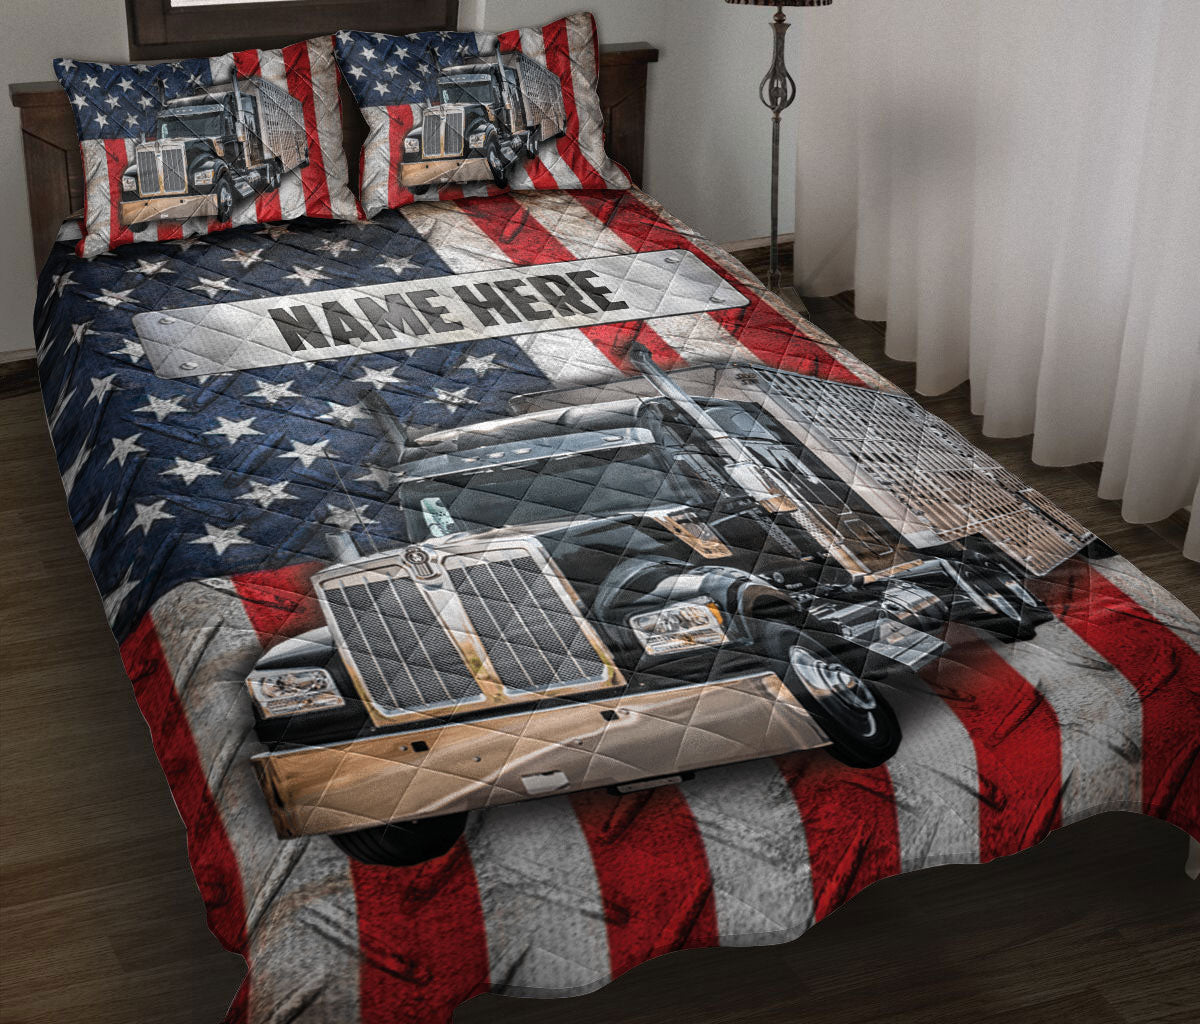 Ohaprints-Quilt-Bed-Set-Pillowcase-Black-Trucker-Vintage-Us-Flag-Truck-Driver-Custom-Personalized-Name-Blanket-Bedspread-Bedding-3582-Throw (55'' x 60'')